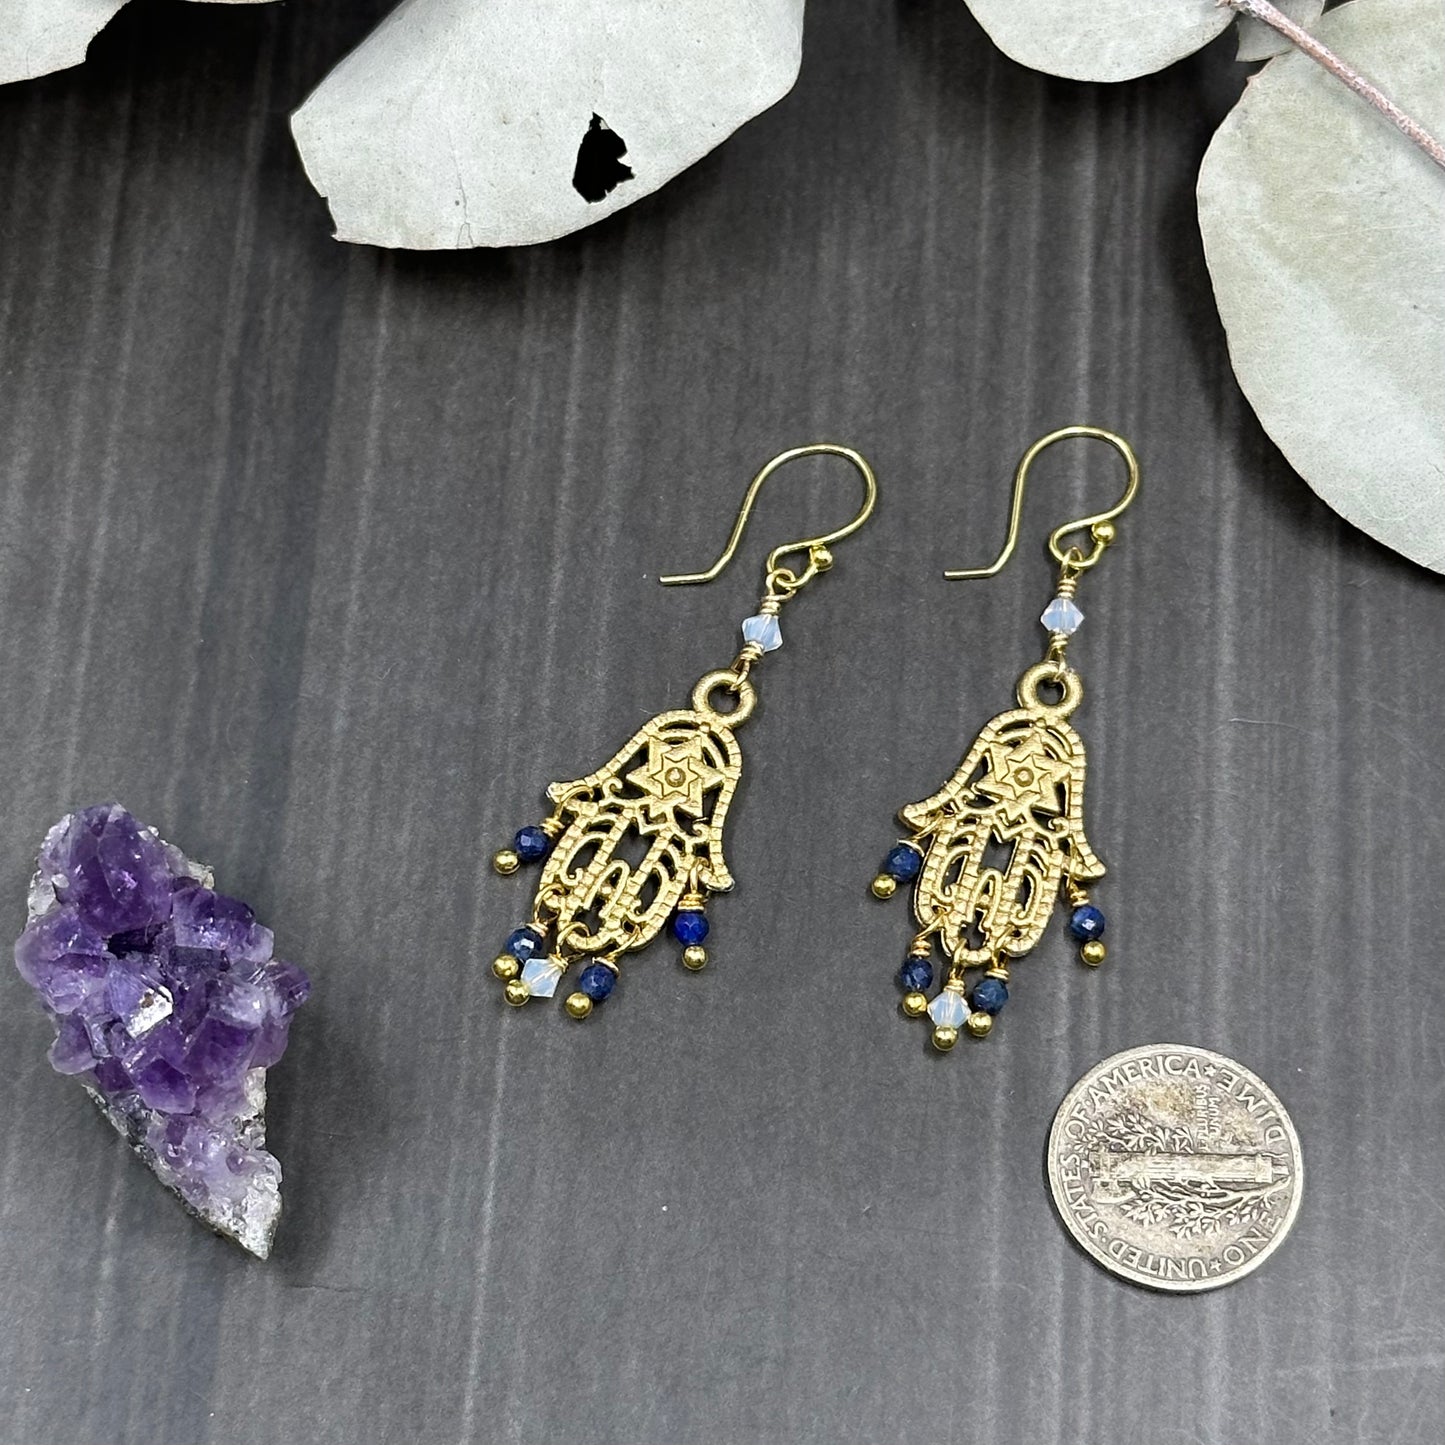 Gold Colored Hamsa Earrings with Lapis Lazuli and Crystals